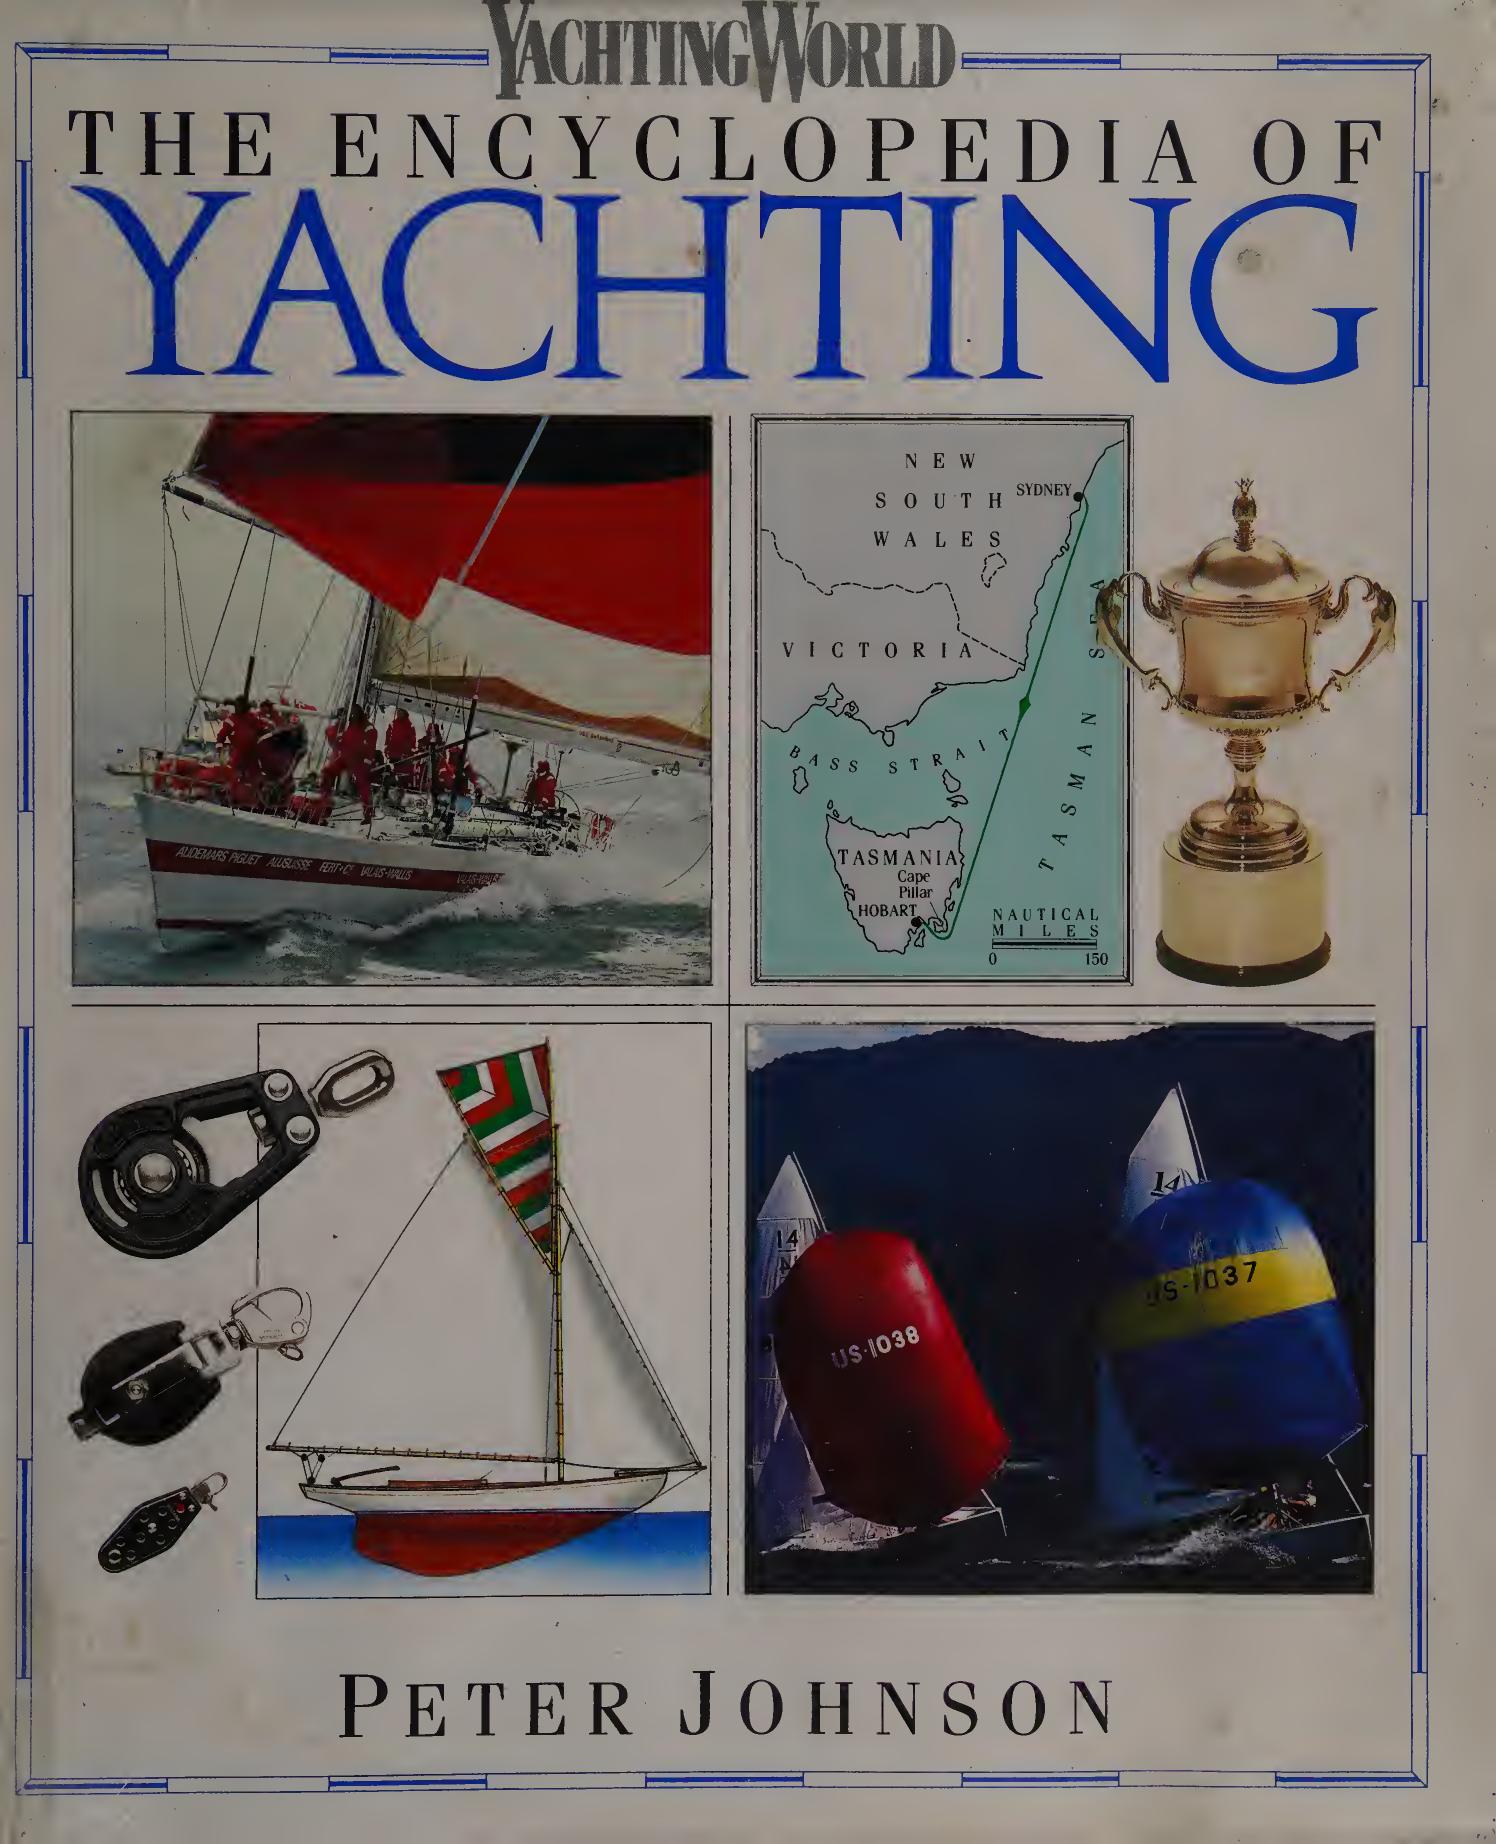 The encyclopedia of yachting by Johnson Peter 1930 Mar. 26-